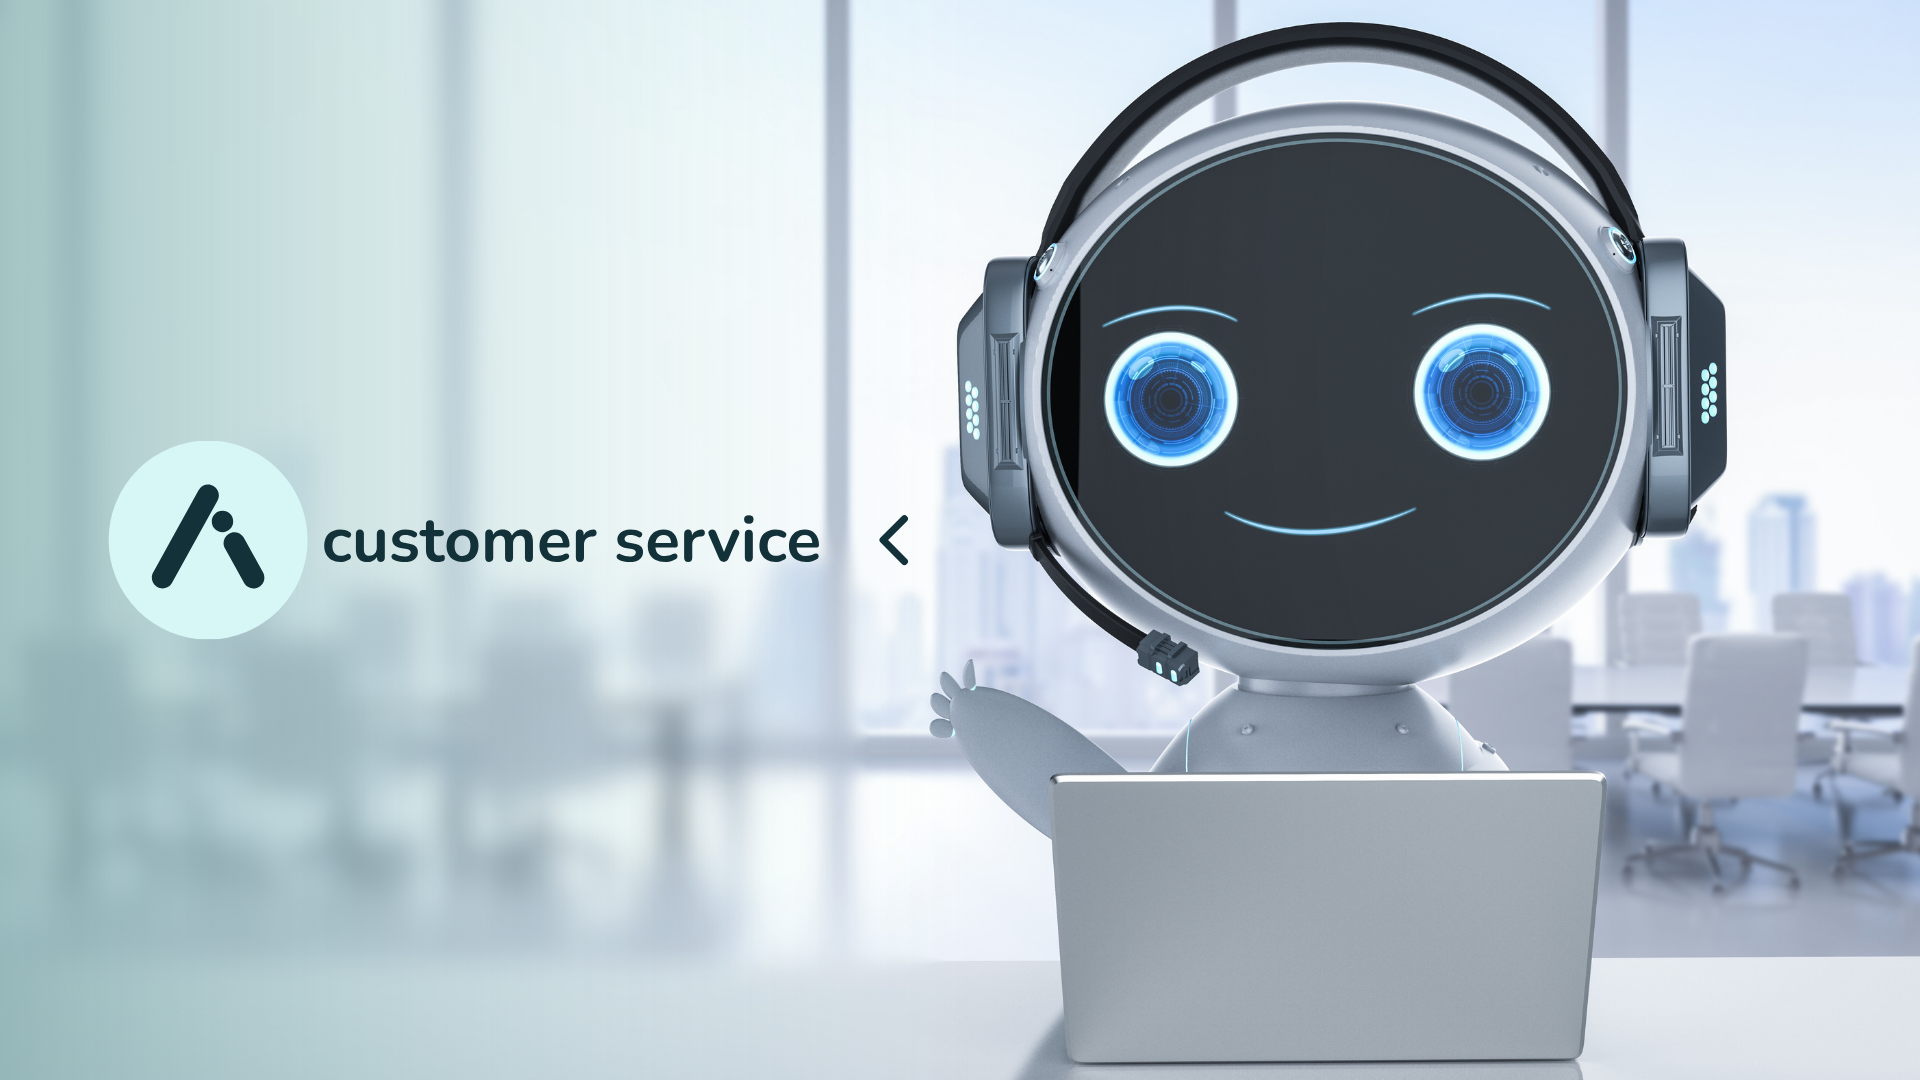 What Can We Achieve with Artificial Intelligence in Customer Service?